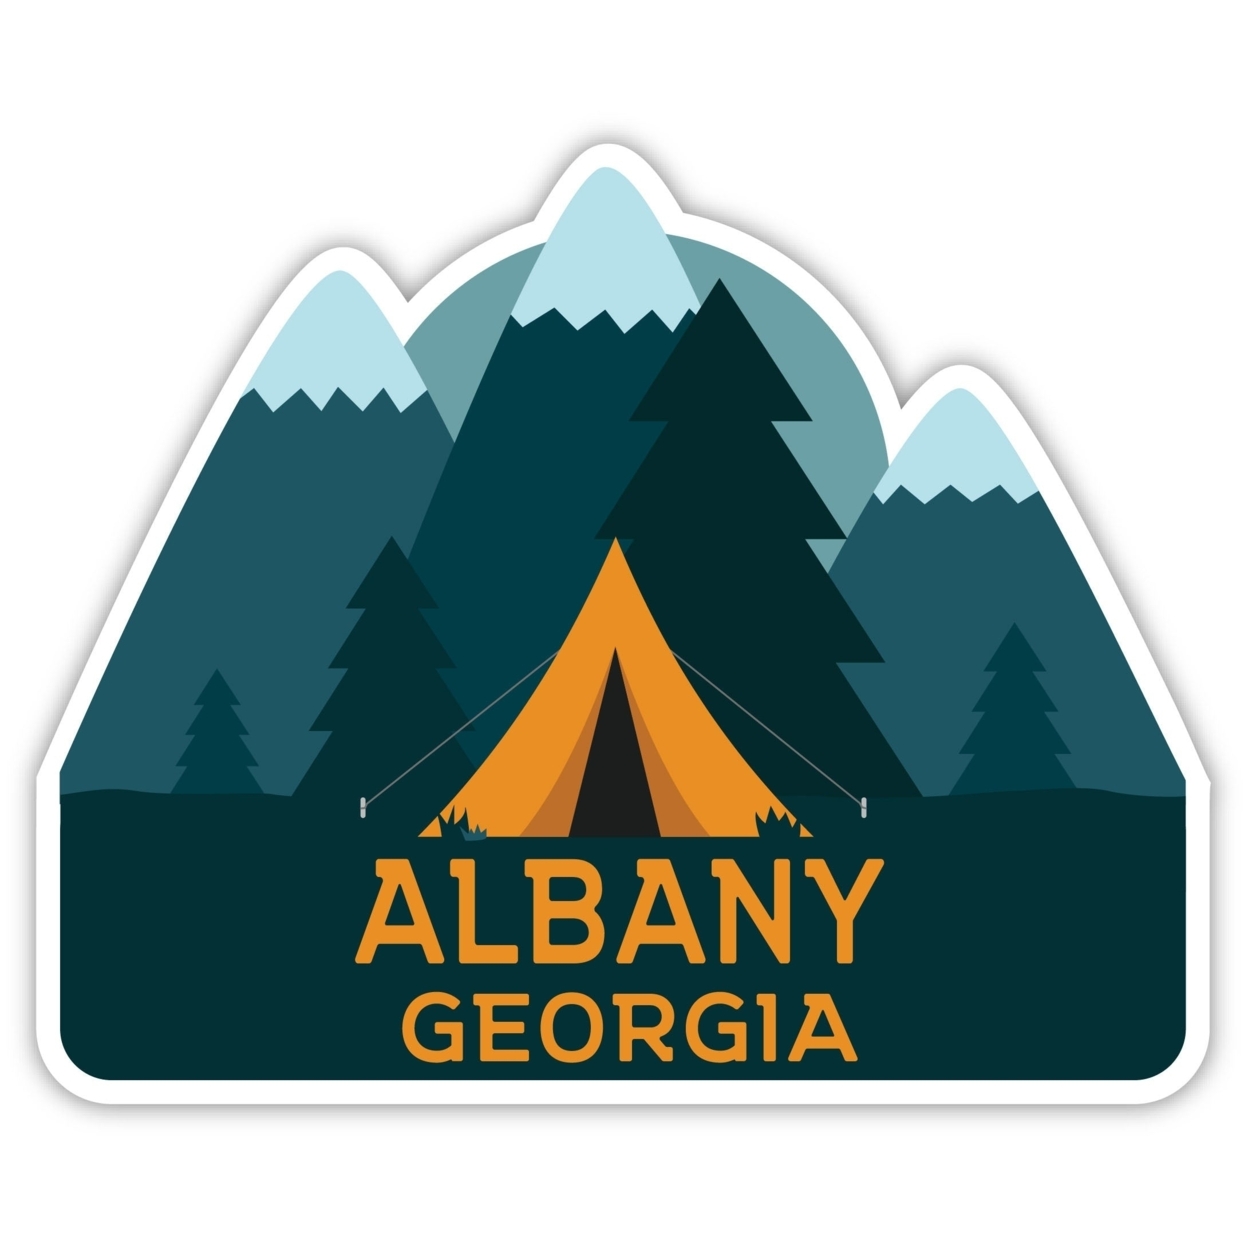 Albany Georgia Souvenir Decorative Stickers (Choose Theme And Size) - 4-Pack, 4-Inch, Bear